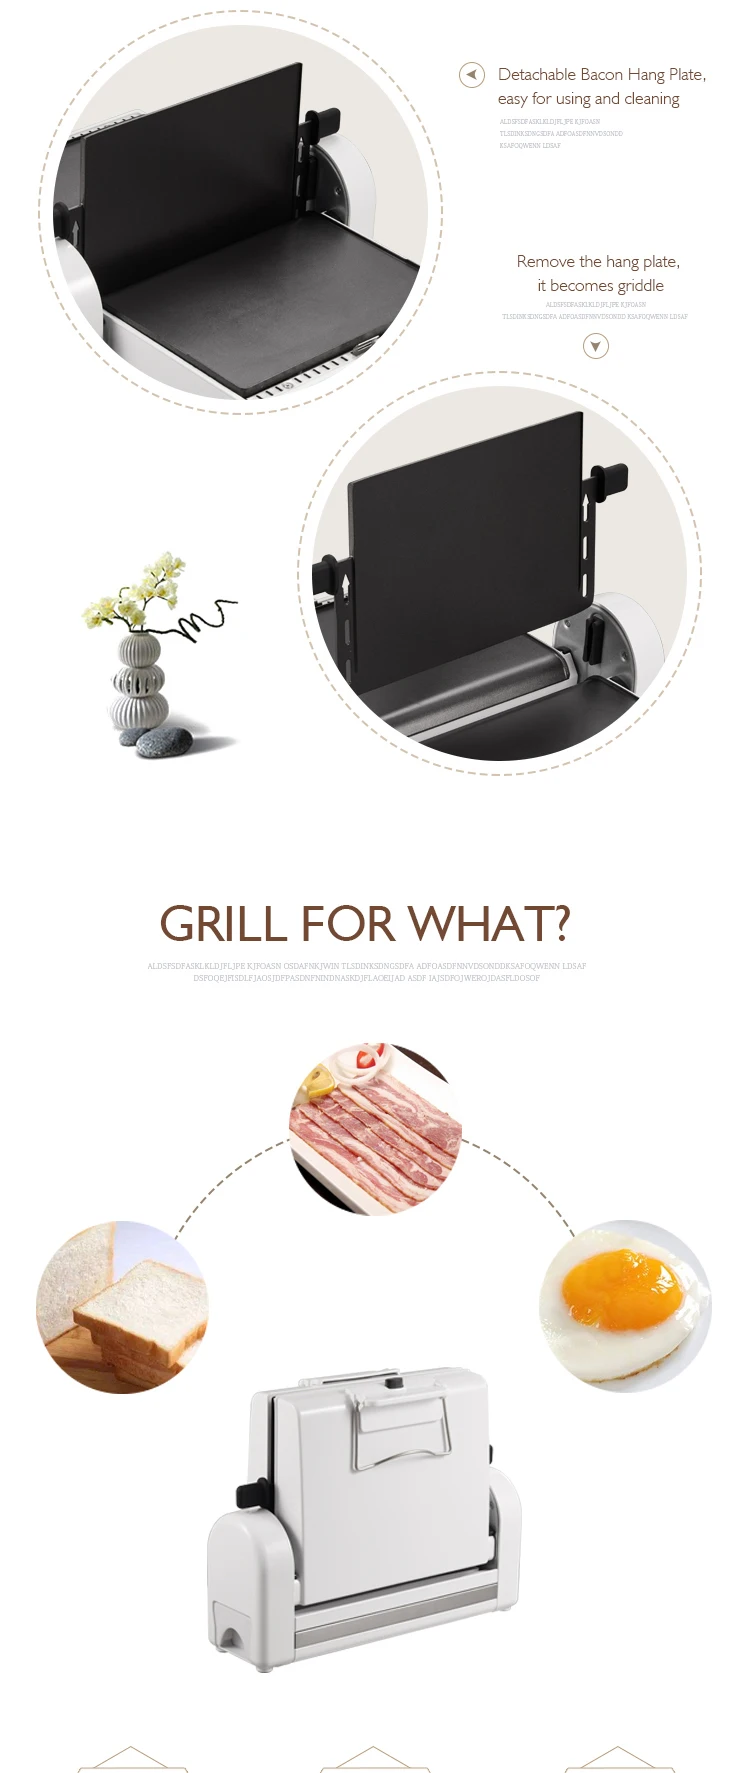 New Hight Quality Electric Non-stick Bacon Express Grill